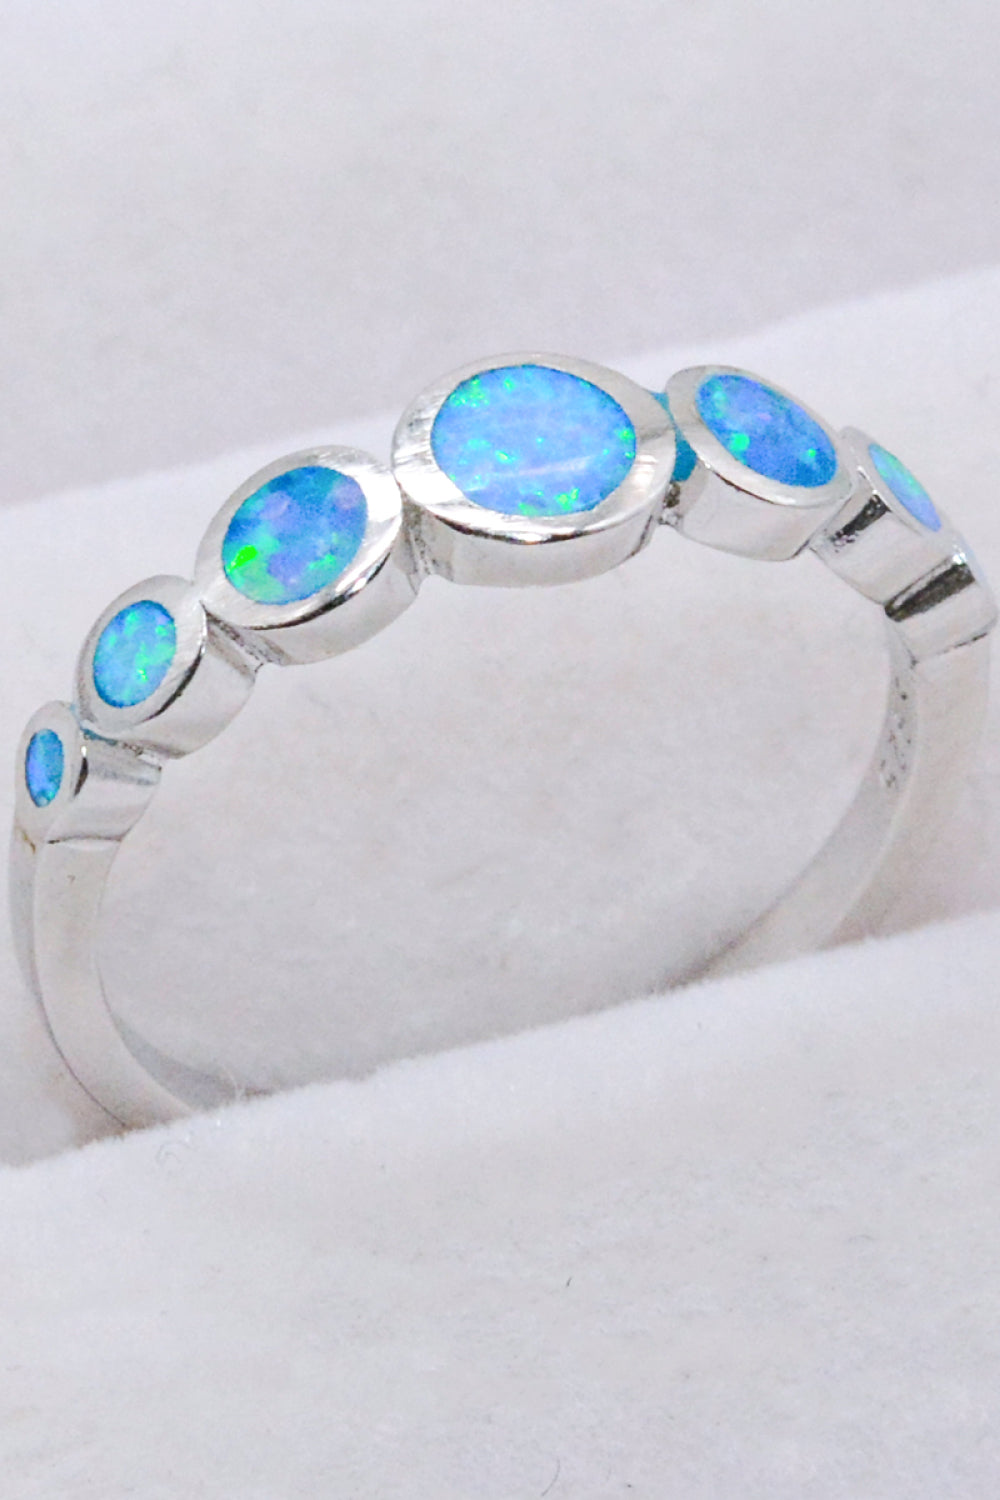 925 Sterling Silver Multi-Opal Ring - Tophatter Shopping Deals - Electronics, Jewelry, Auction, App, Bidding, Gadgets, Fashion